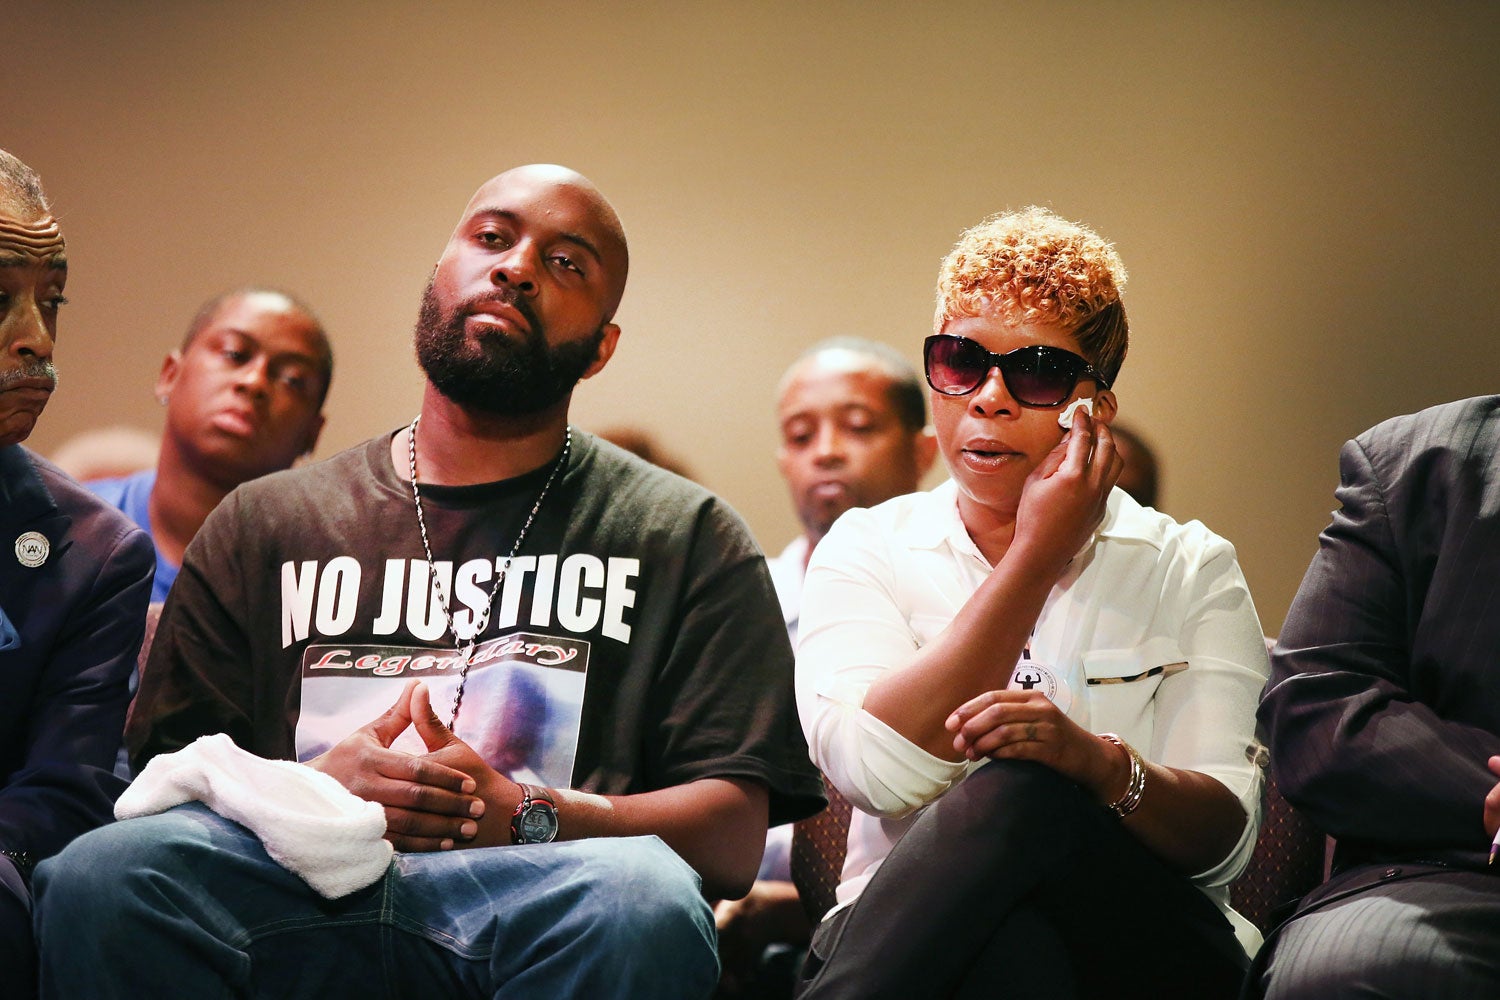 What Will the Holidays Be Like for the Families of Mike Brown, Eric Garner, and Tamir Rice?